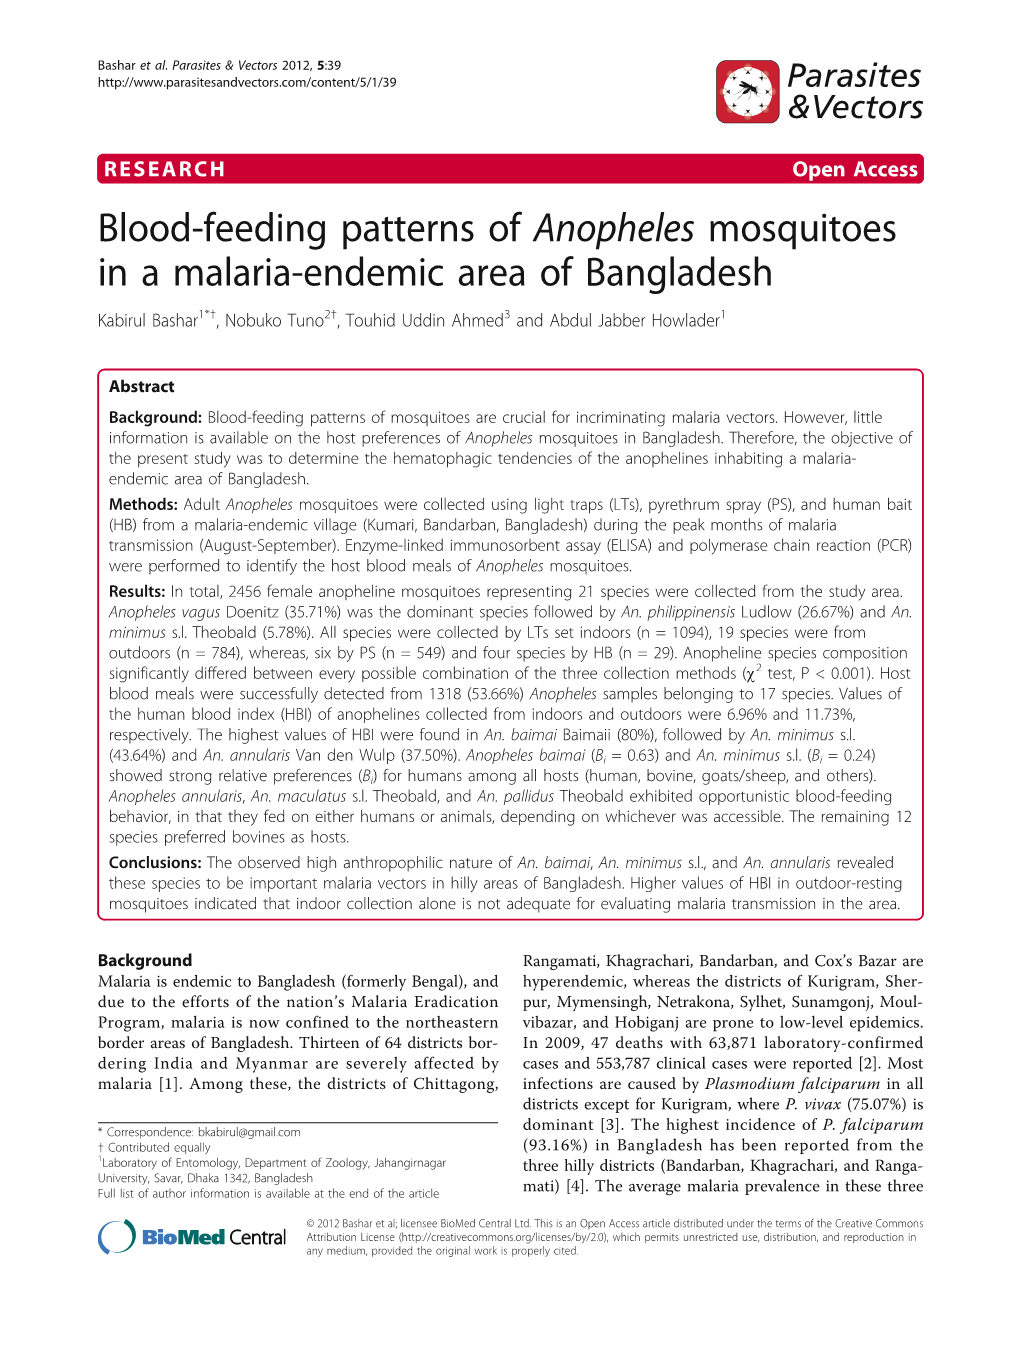 Blood-Feeding Patterns of Anopheles Mosquitoes in a Malaria-Endemic